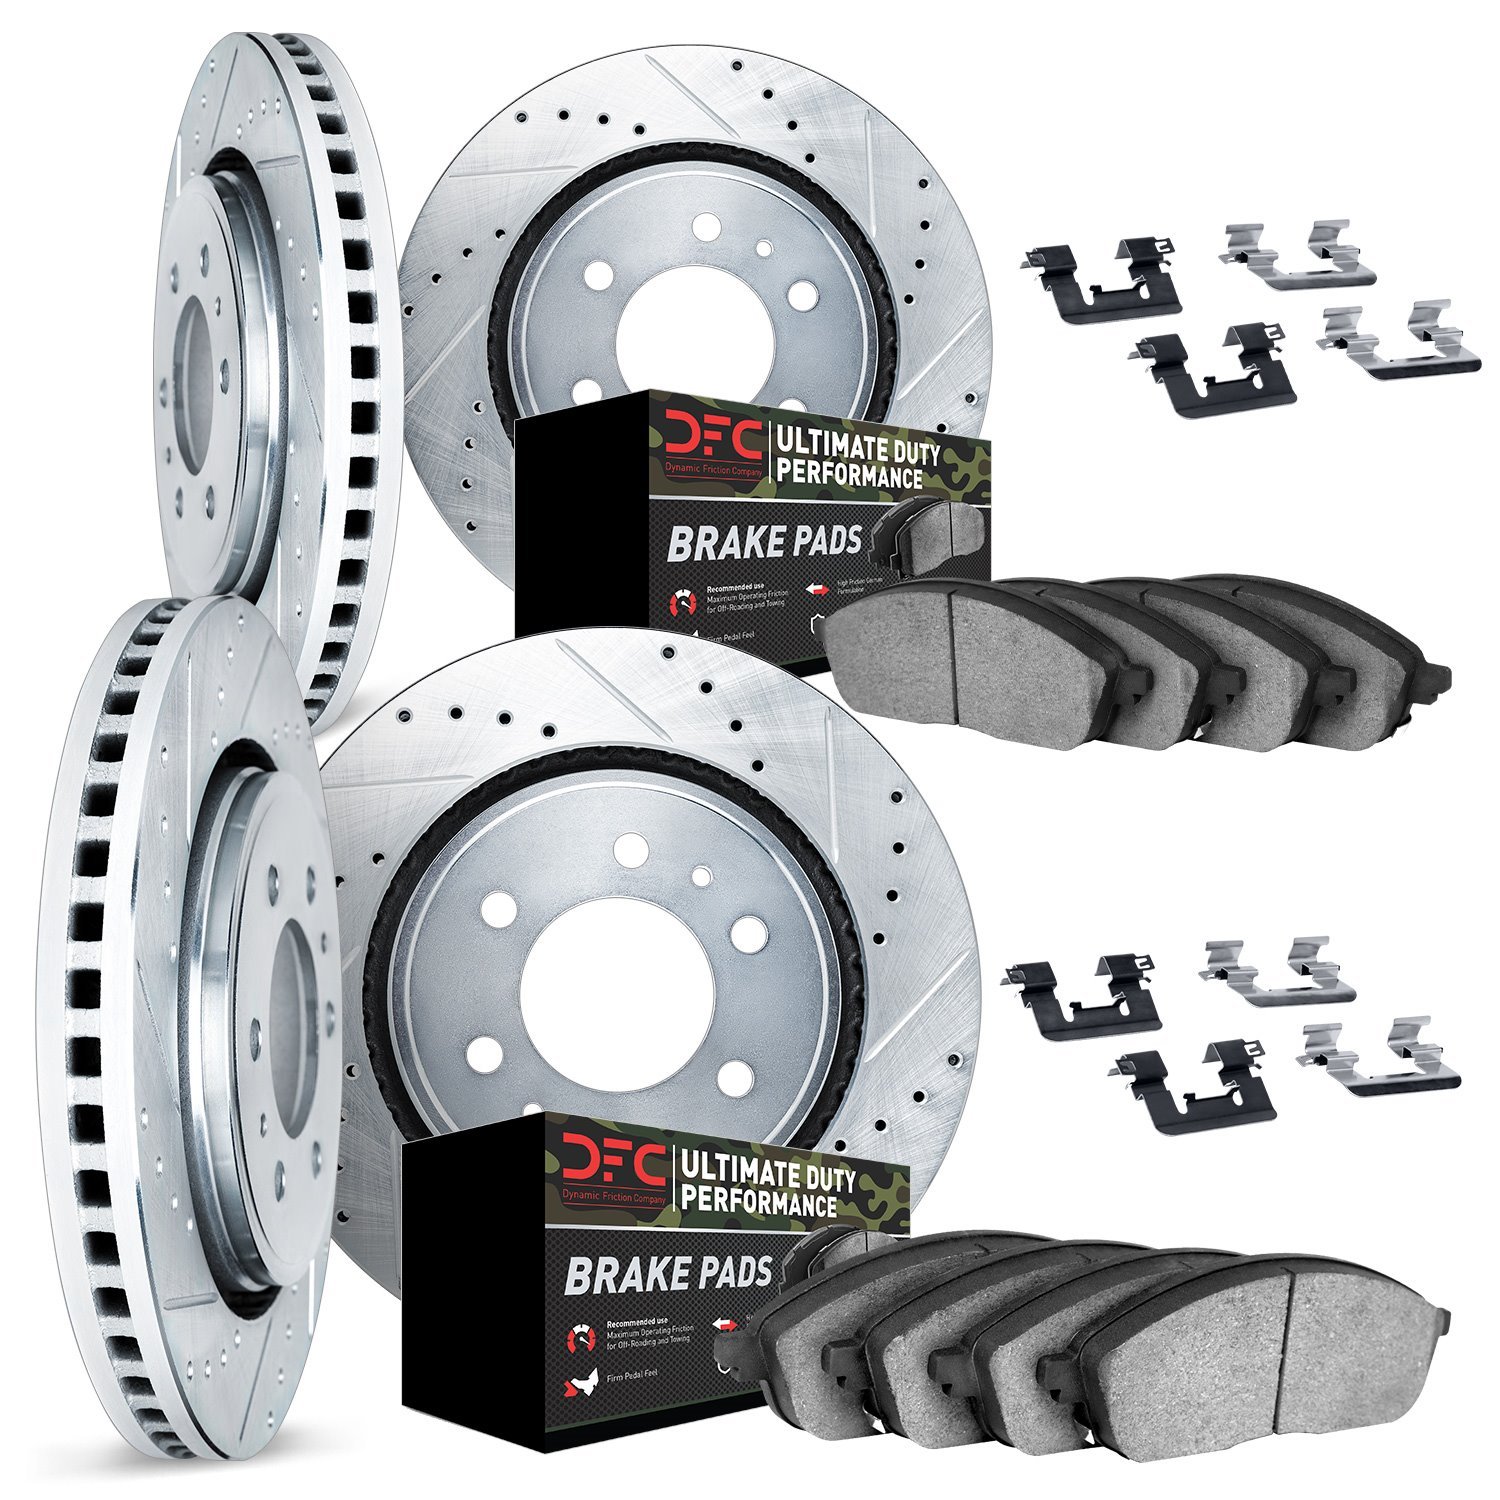 7414-76008 Drilled/Slotted Brake Rotors with Ultimate-Duty Brake Pads Kit & Hardware [Silver], Fits Select Lexus/Toyota/Scion, P